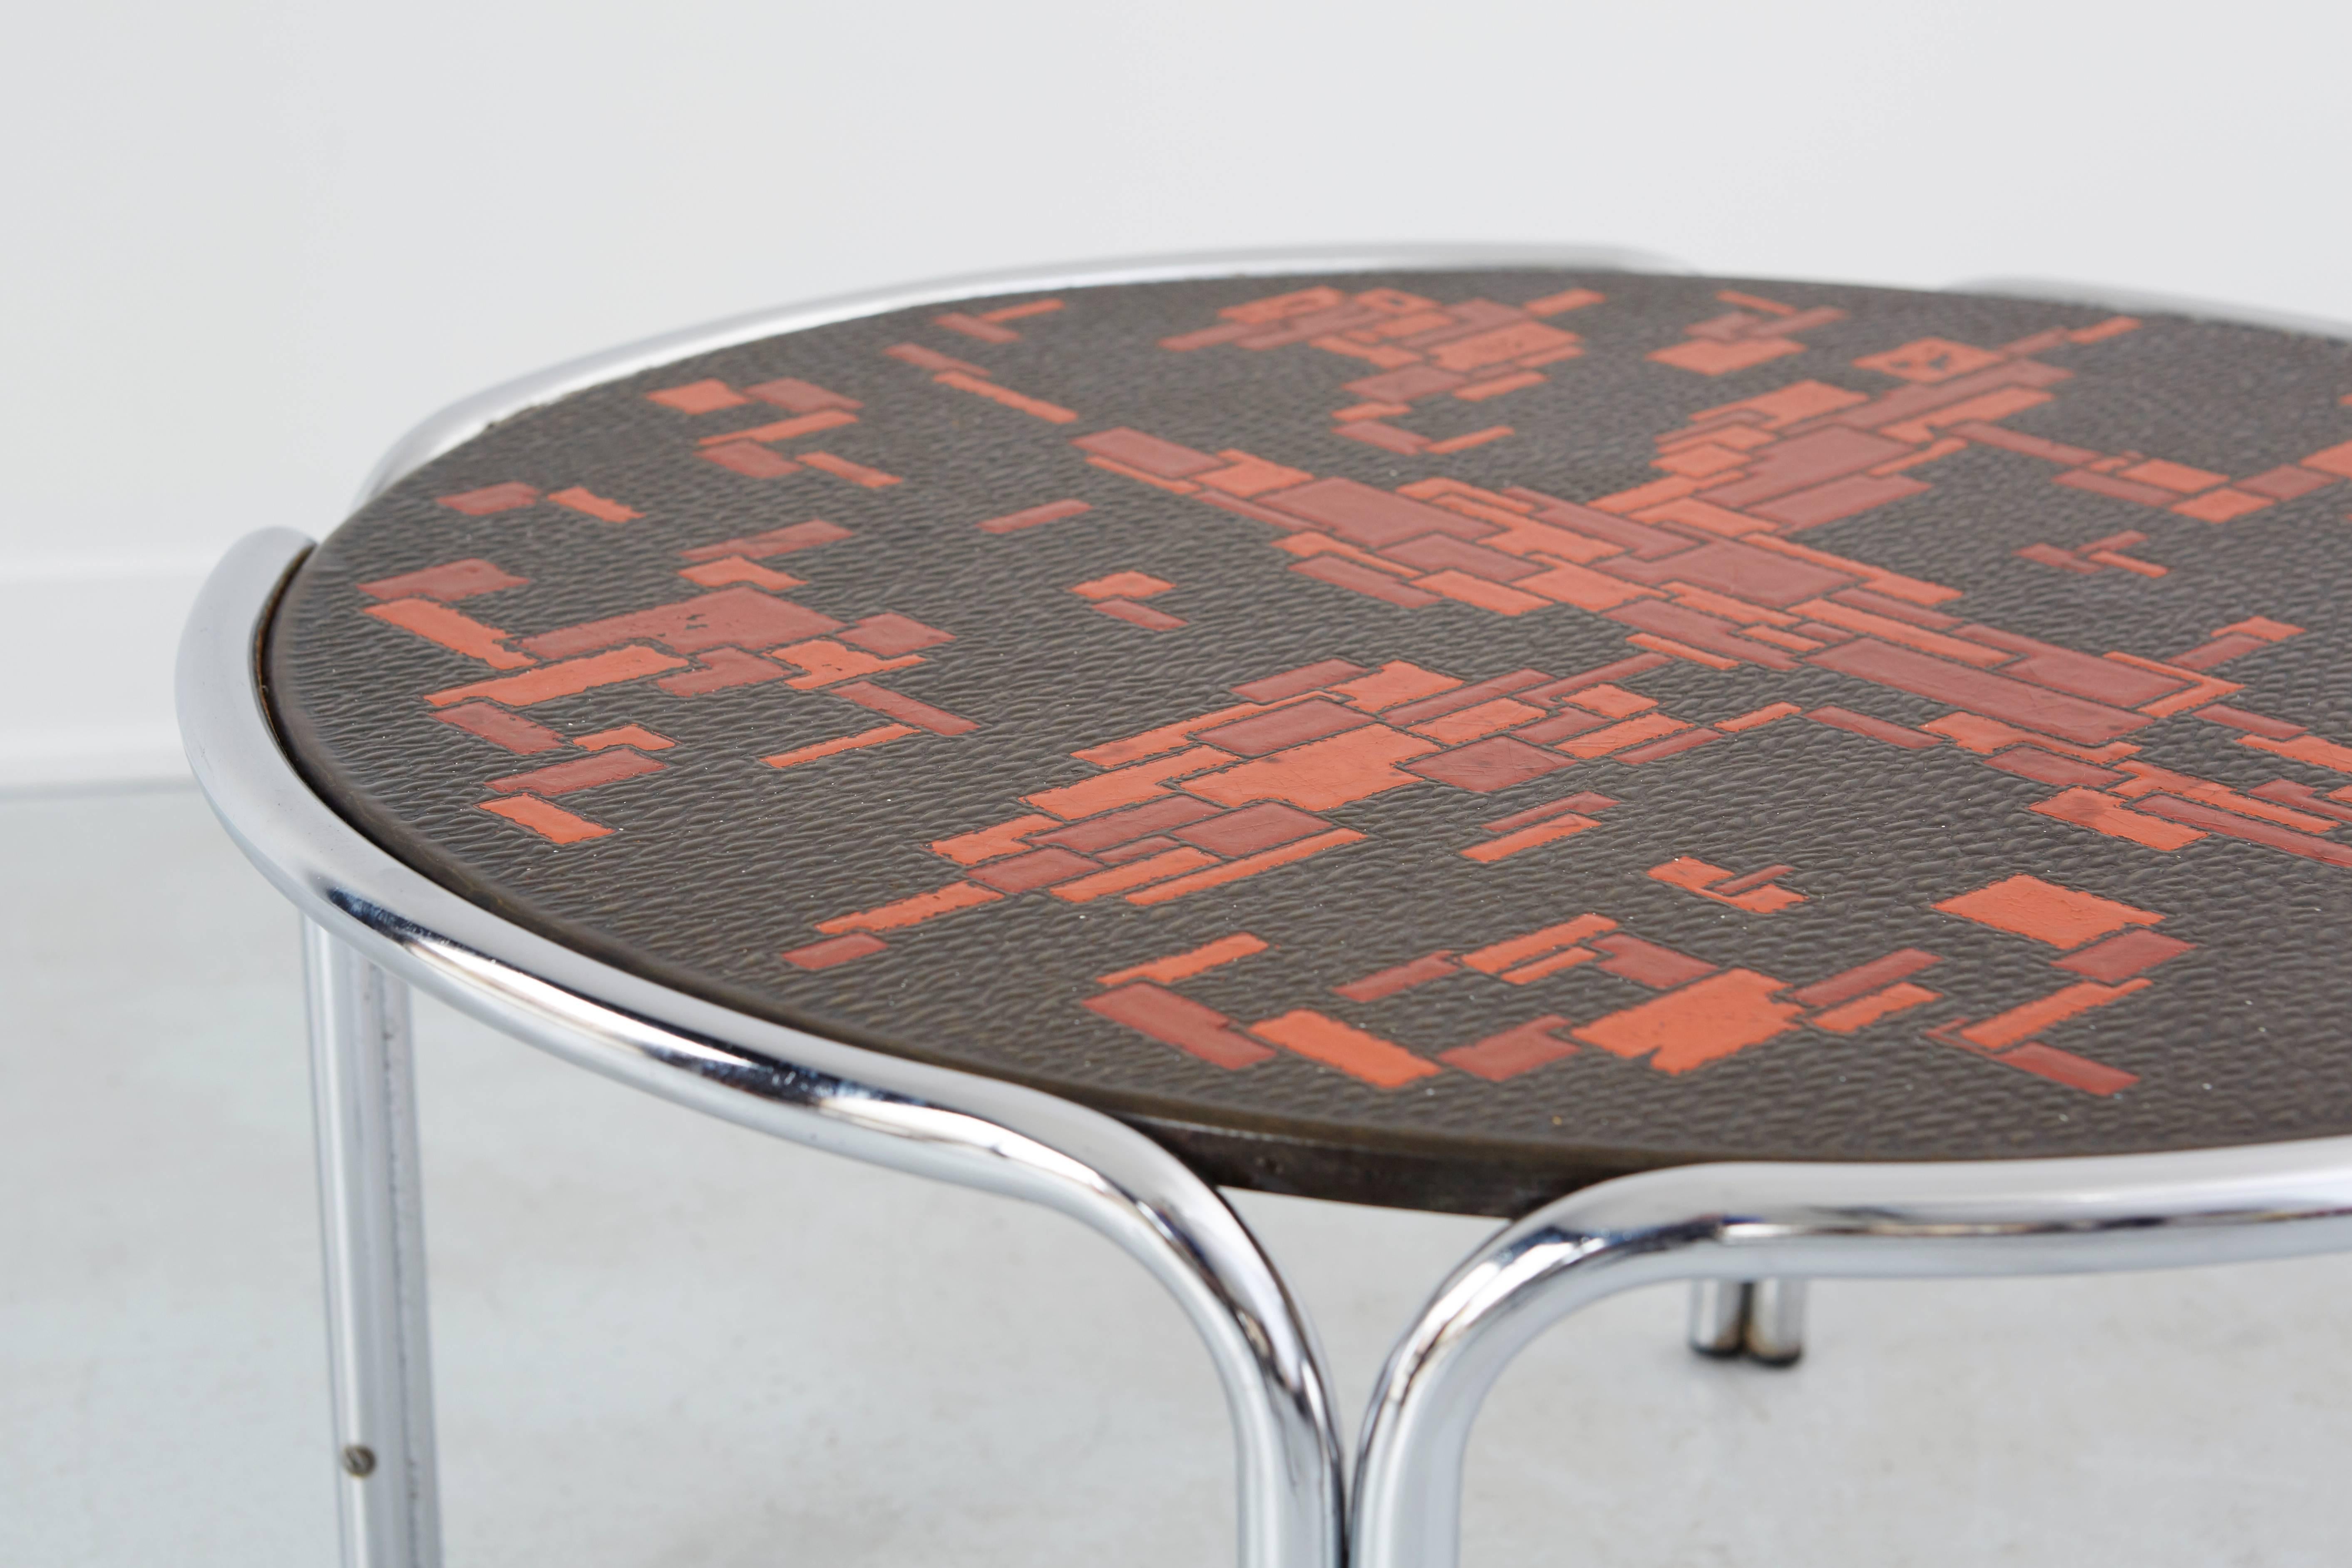 Mid-Century cocktail table attributed to Roger Capron. Tabletop is an abstract mosaic mandarian orange and blood red geometric design with feathered black background. Tabletop is balanced by chromed steel legs. Table is from London, England, circa